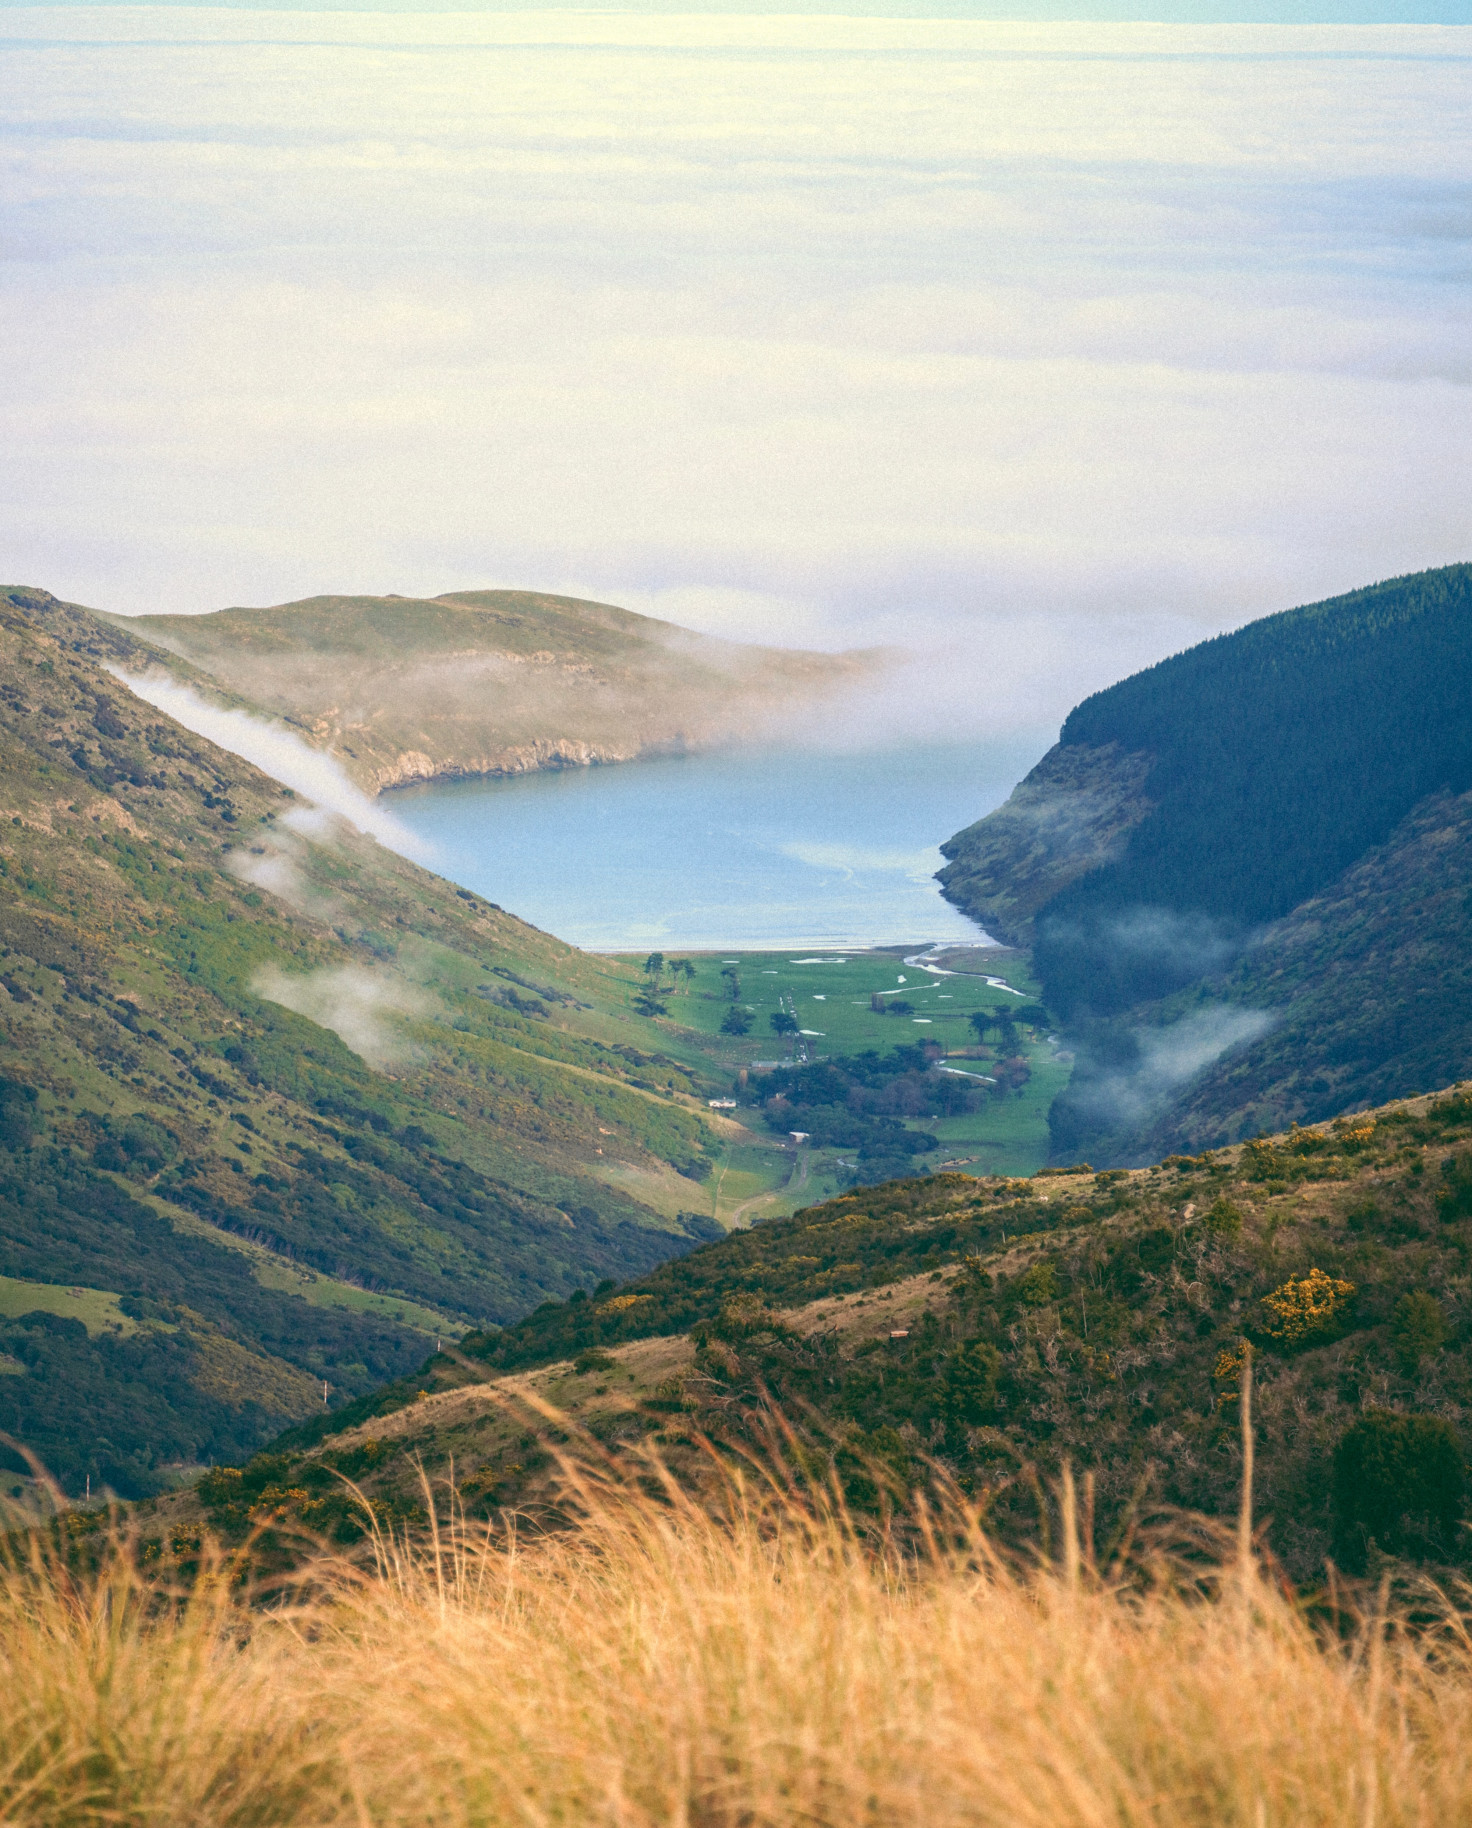 View of green mountainside next to ocean with clouds and blue sky